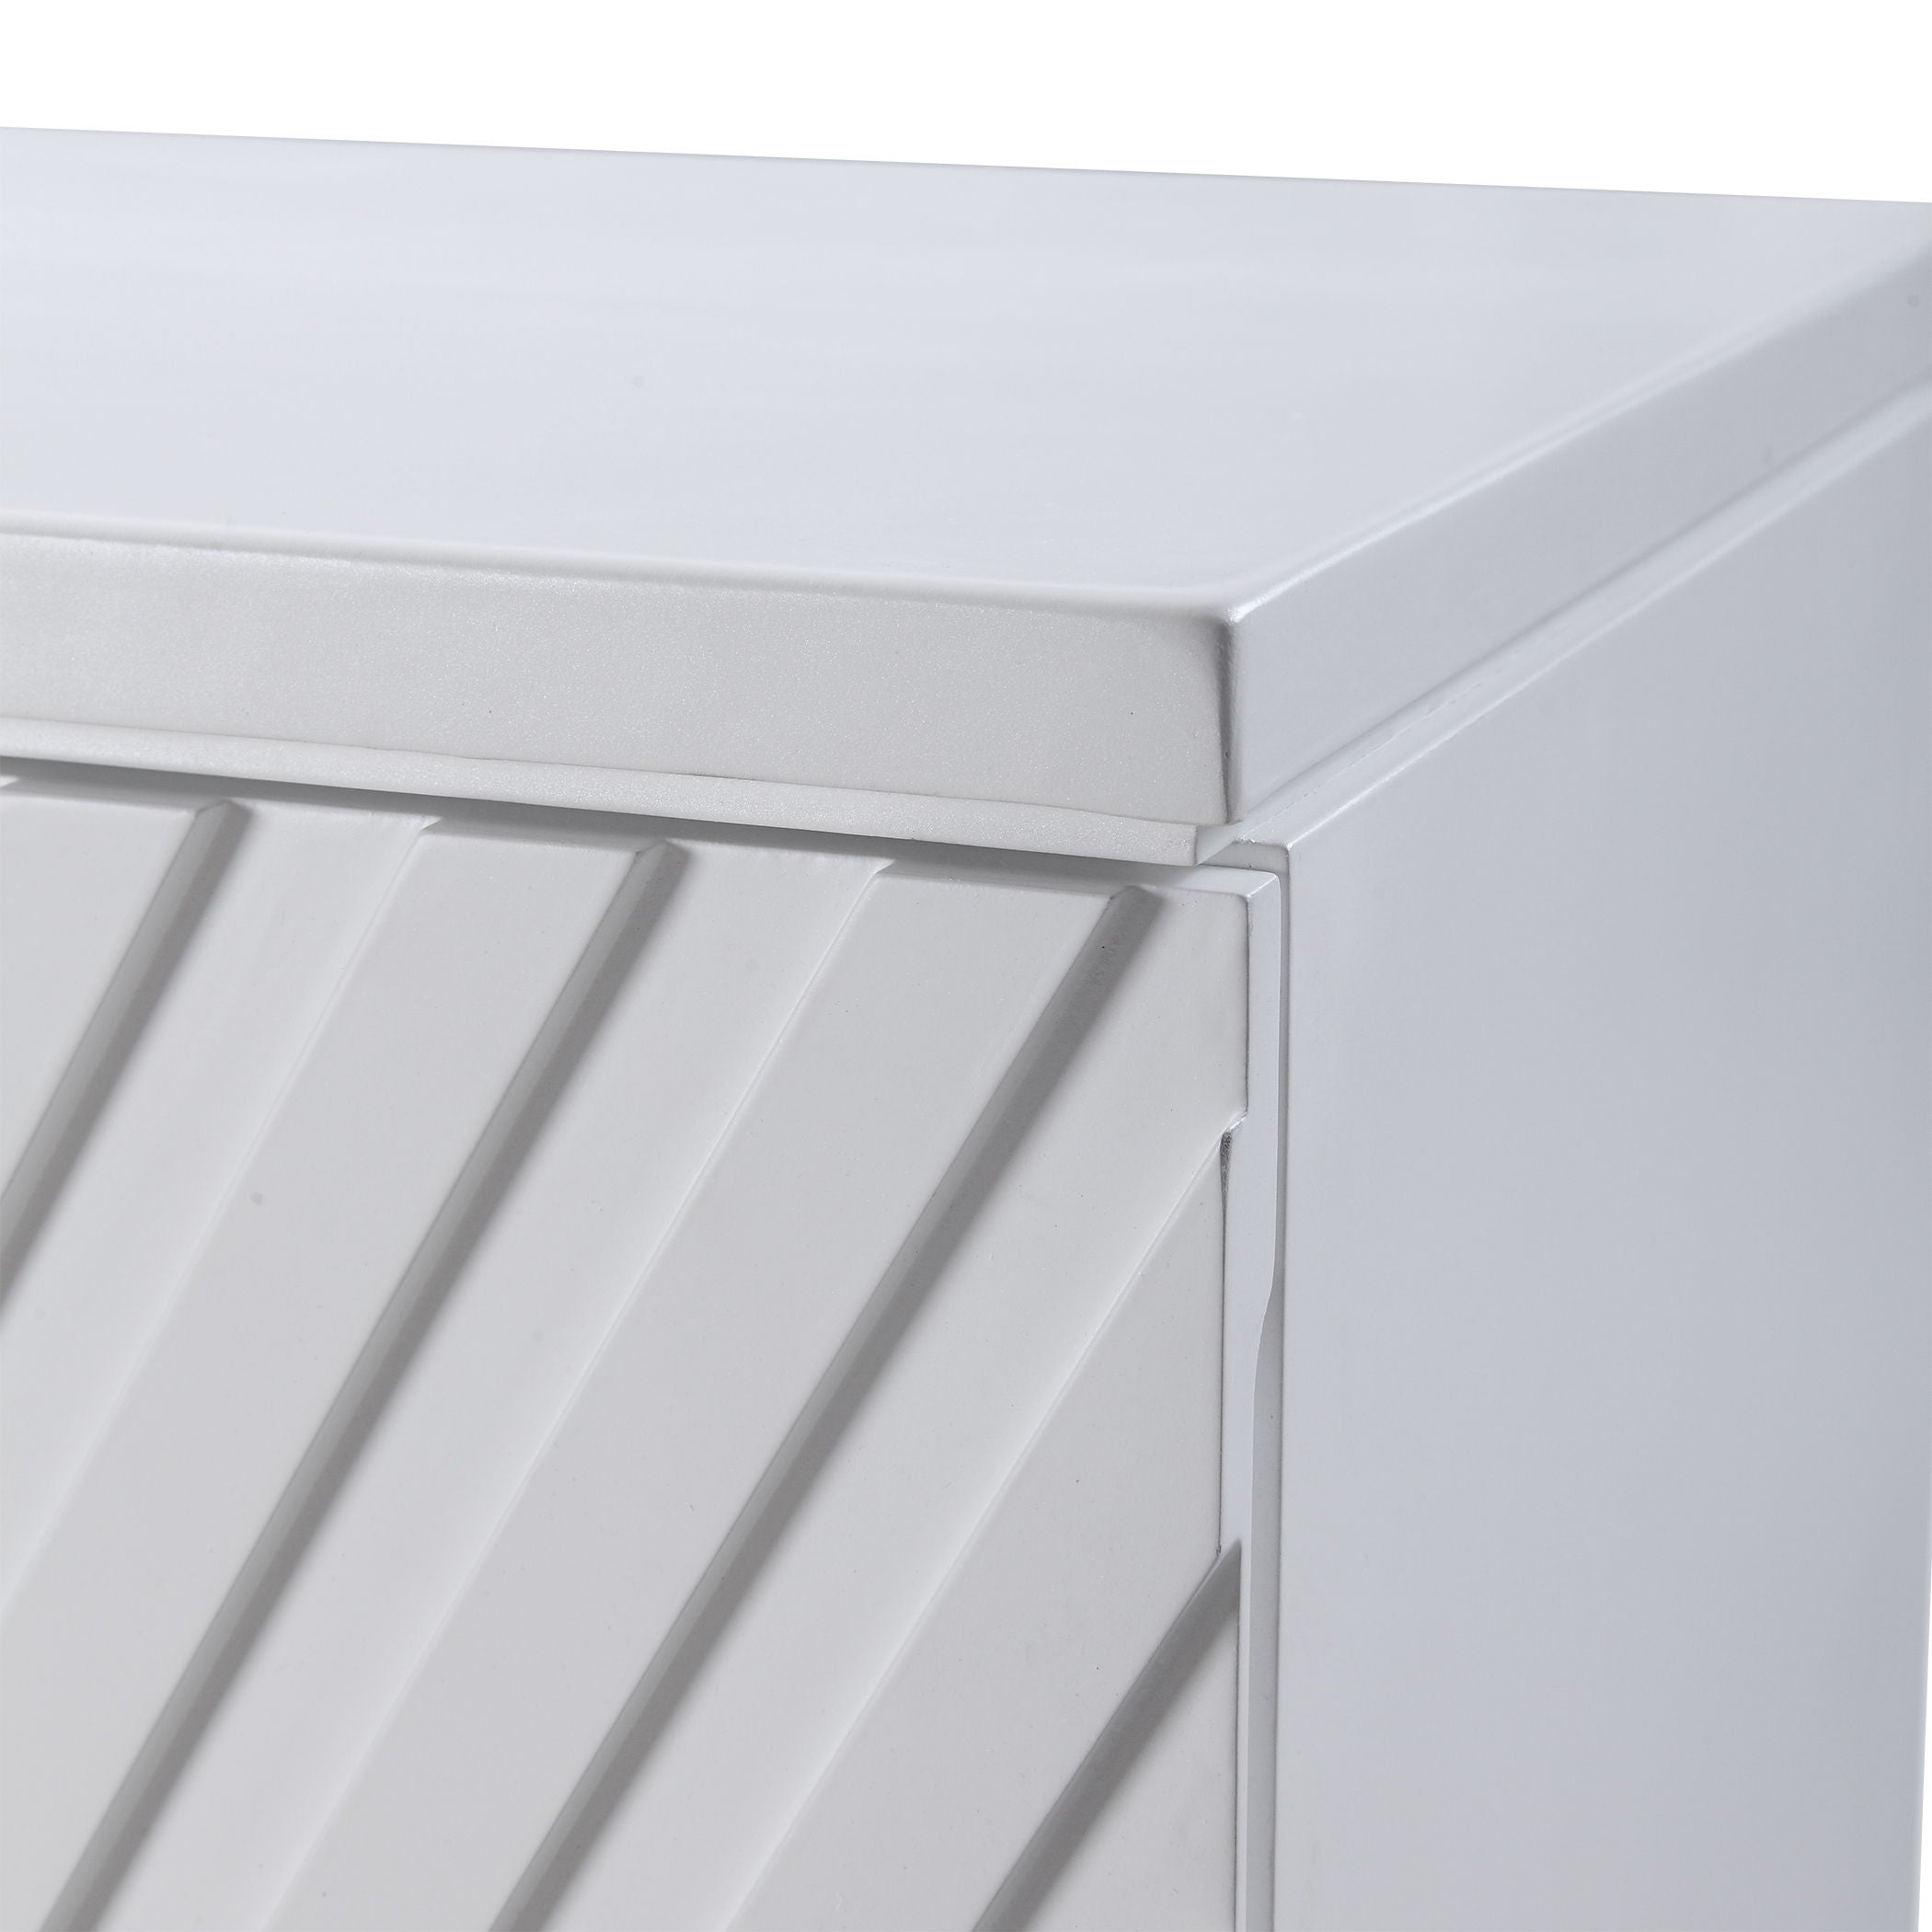 Colby - Drawer Chest - White